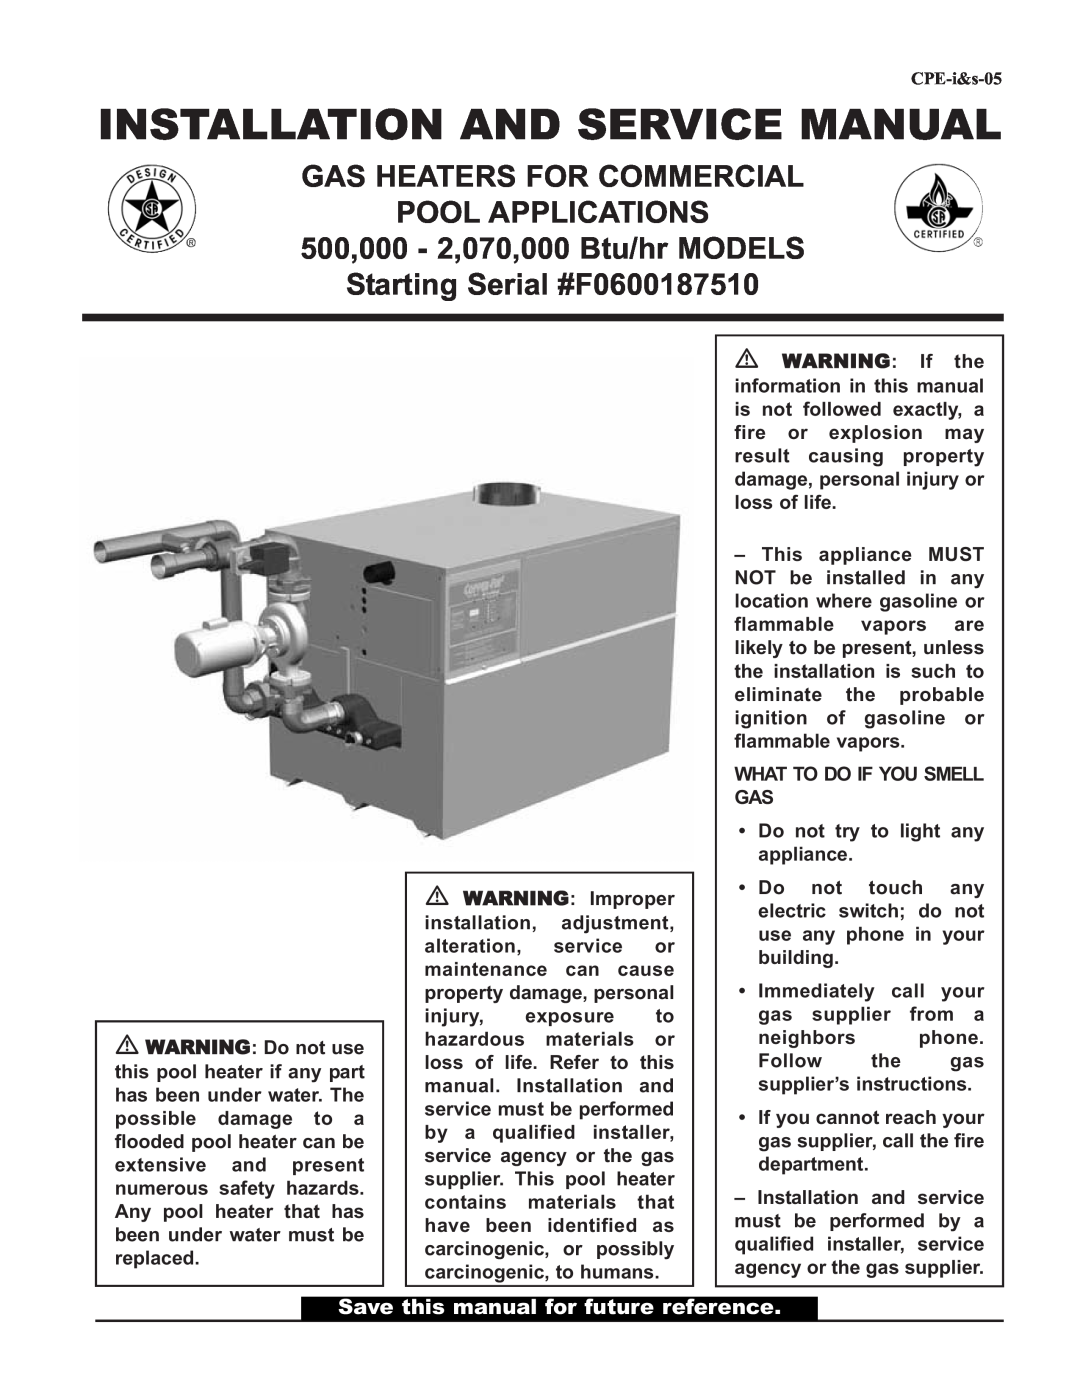 Lochinvar GAS HEATER FOR COMMERICAL POOL APPLICATIONS service manual Installation And Service Manual 